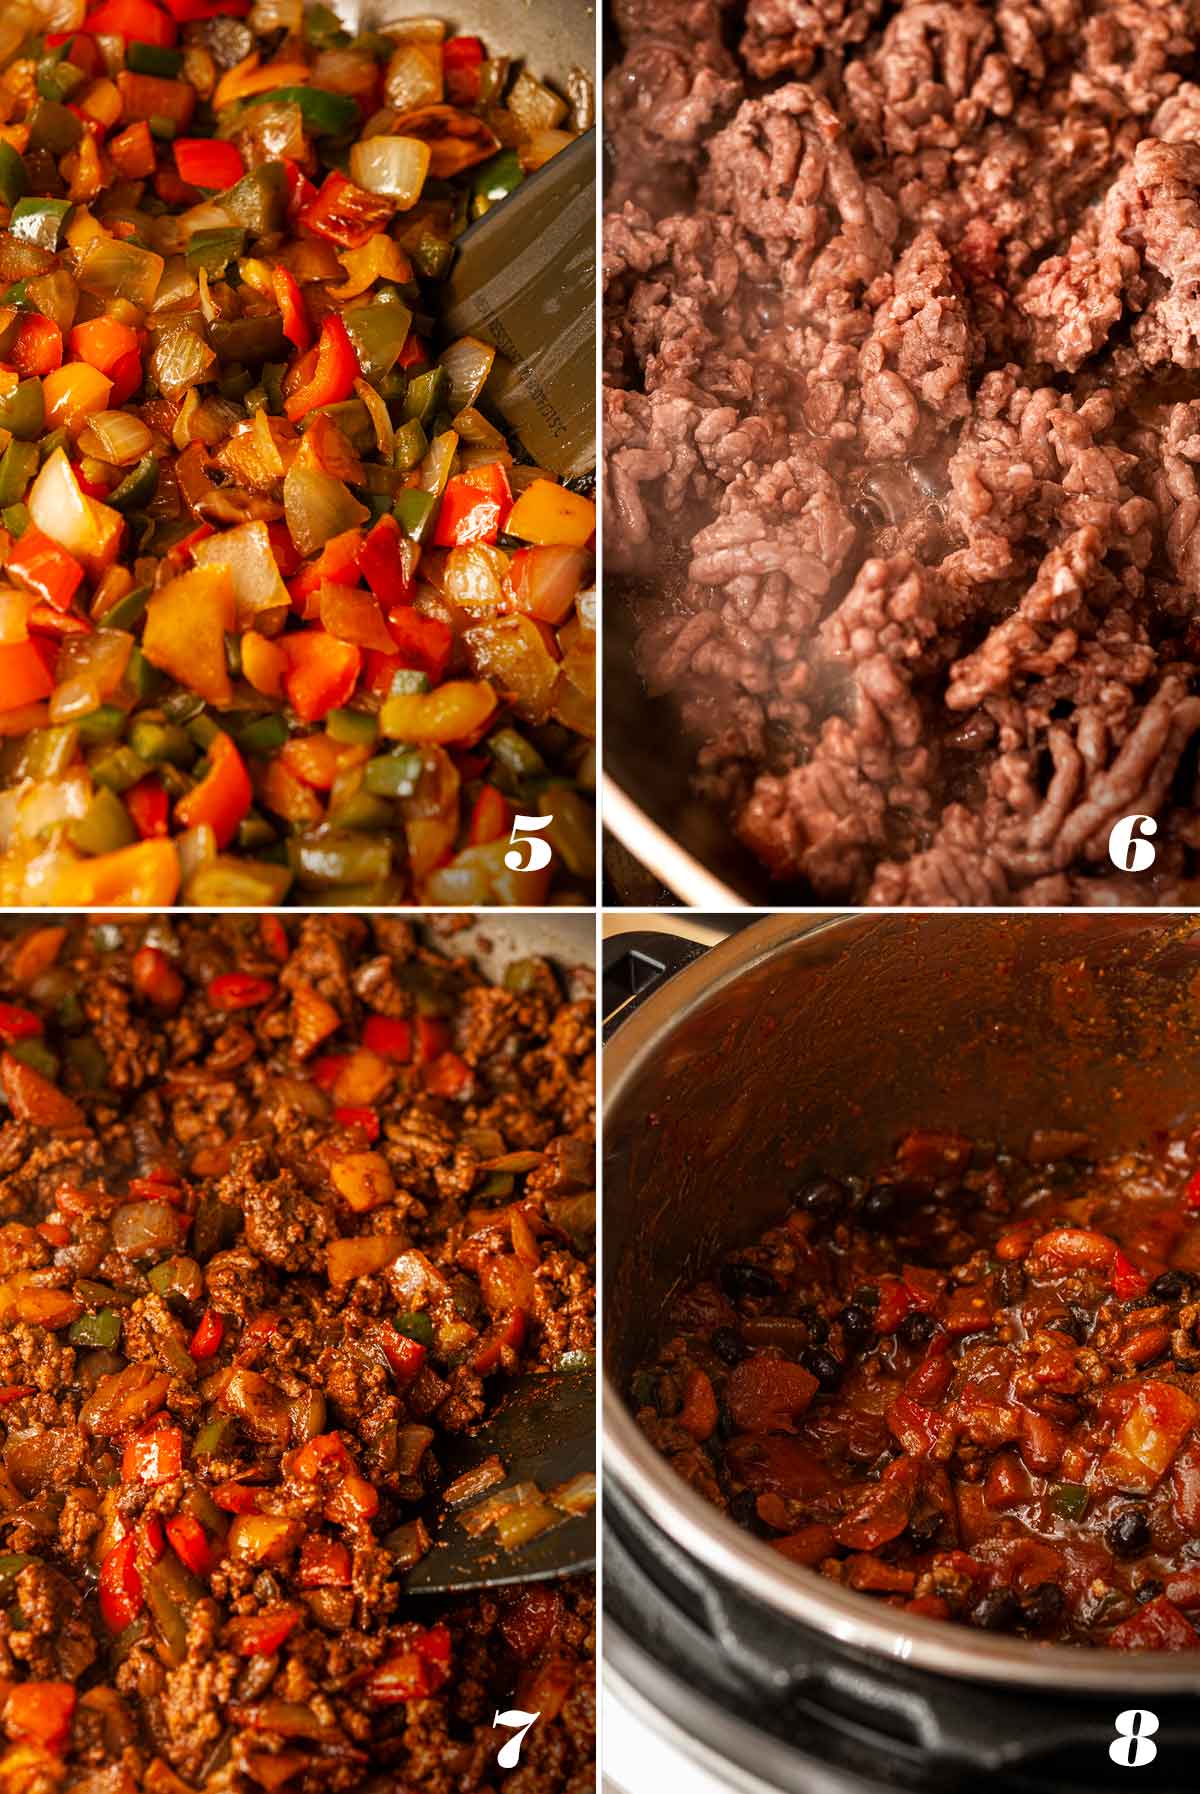 A collage of 4 numbered images showing how to make spicy beef chili.